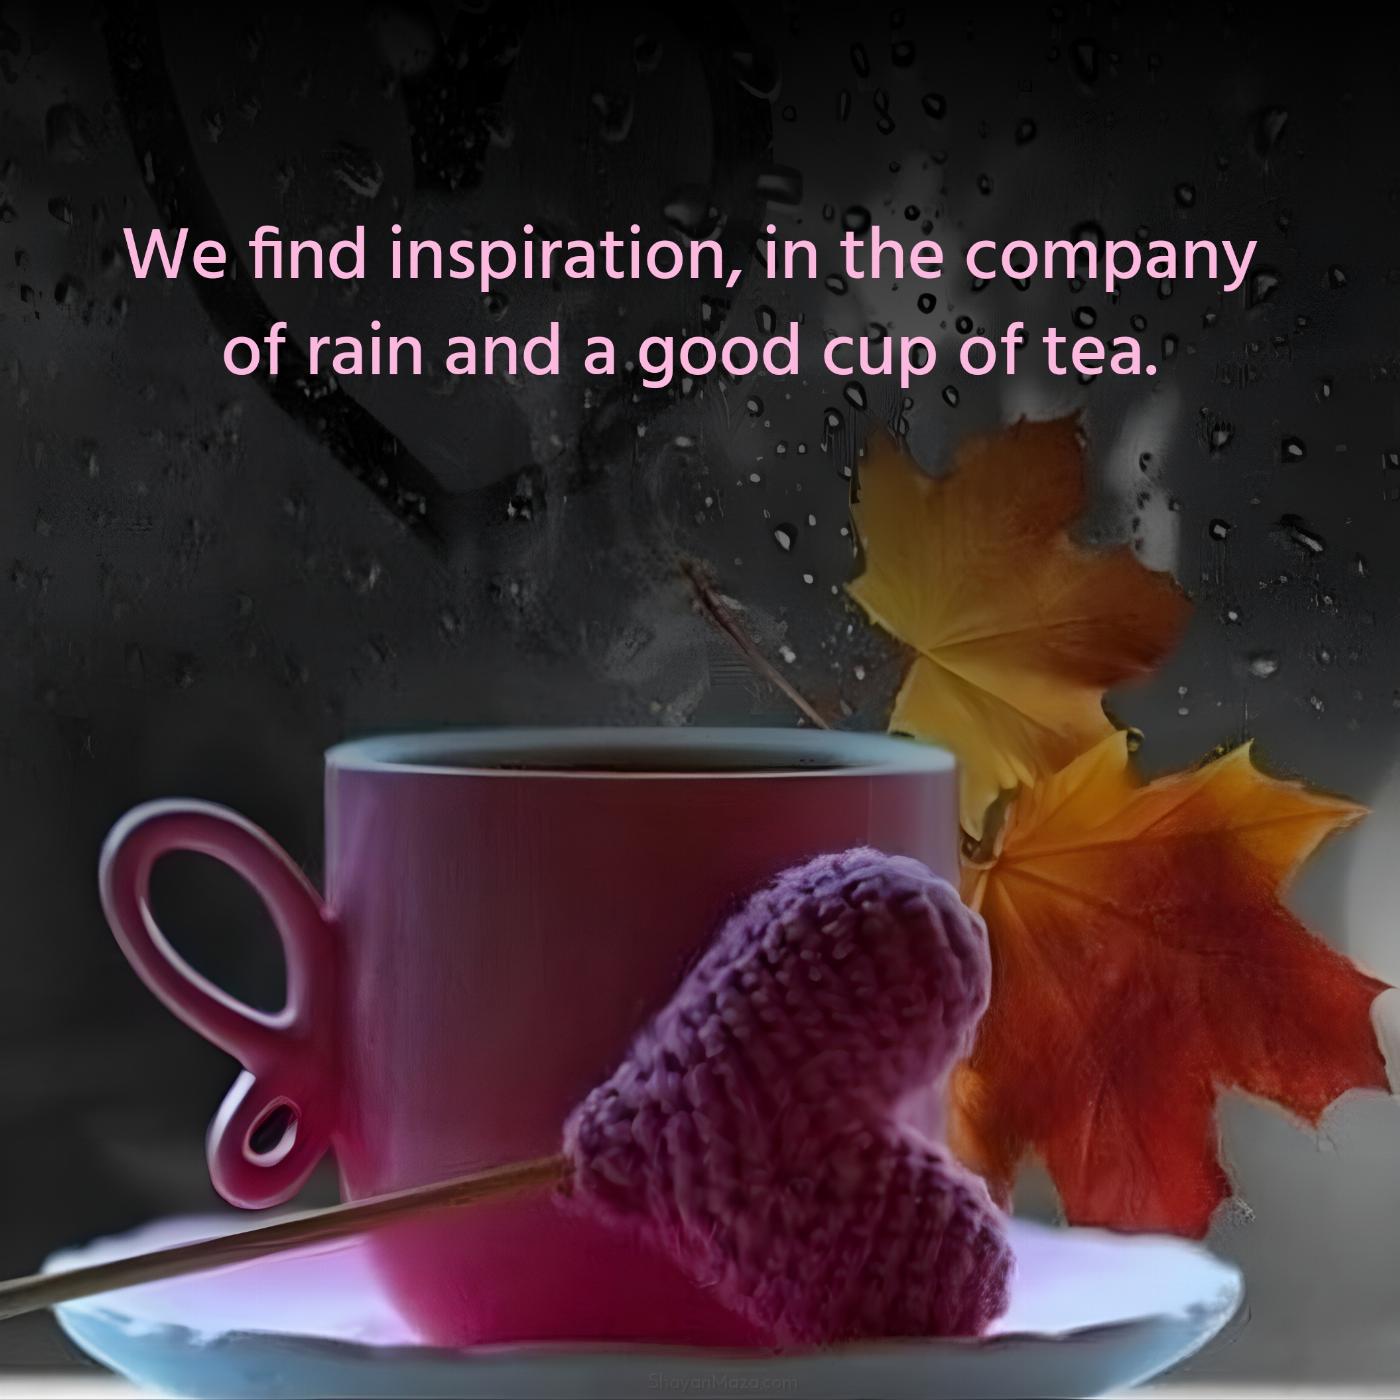 We find inspiration in the company of rain and a good cup of tea